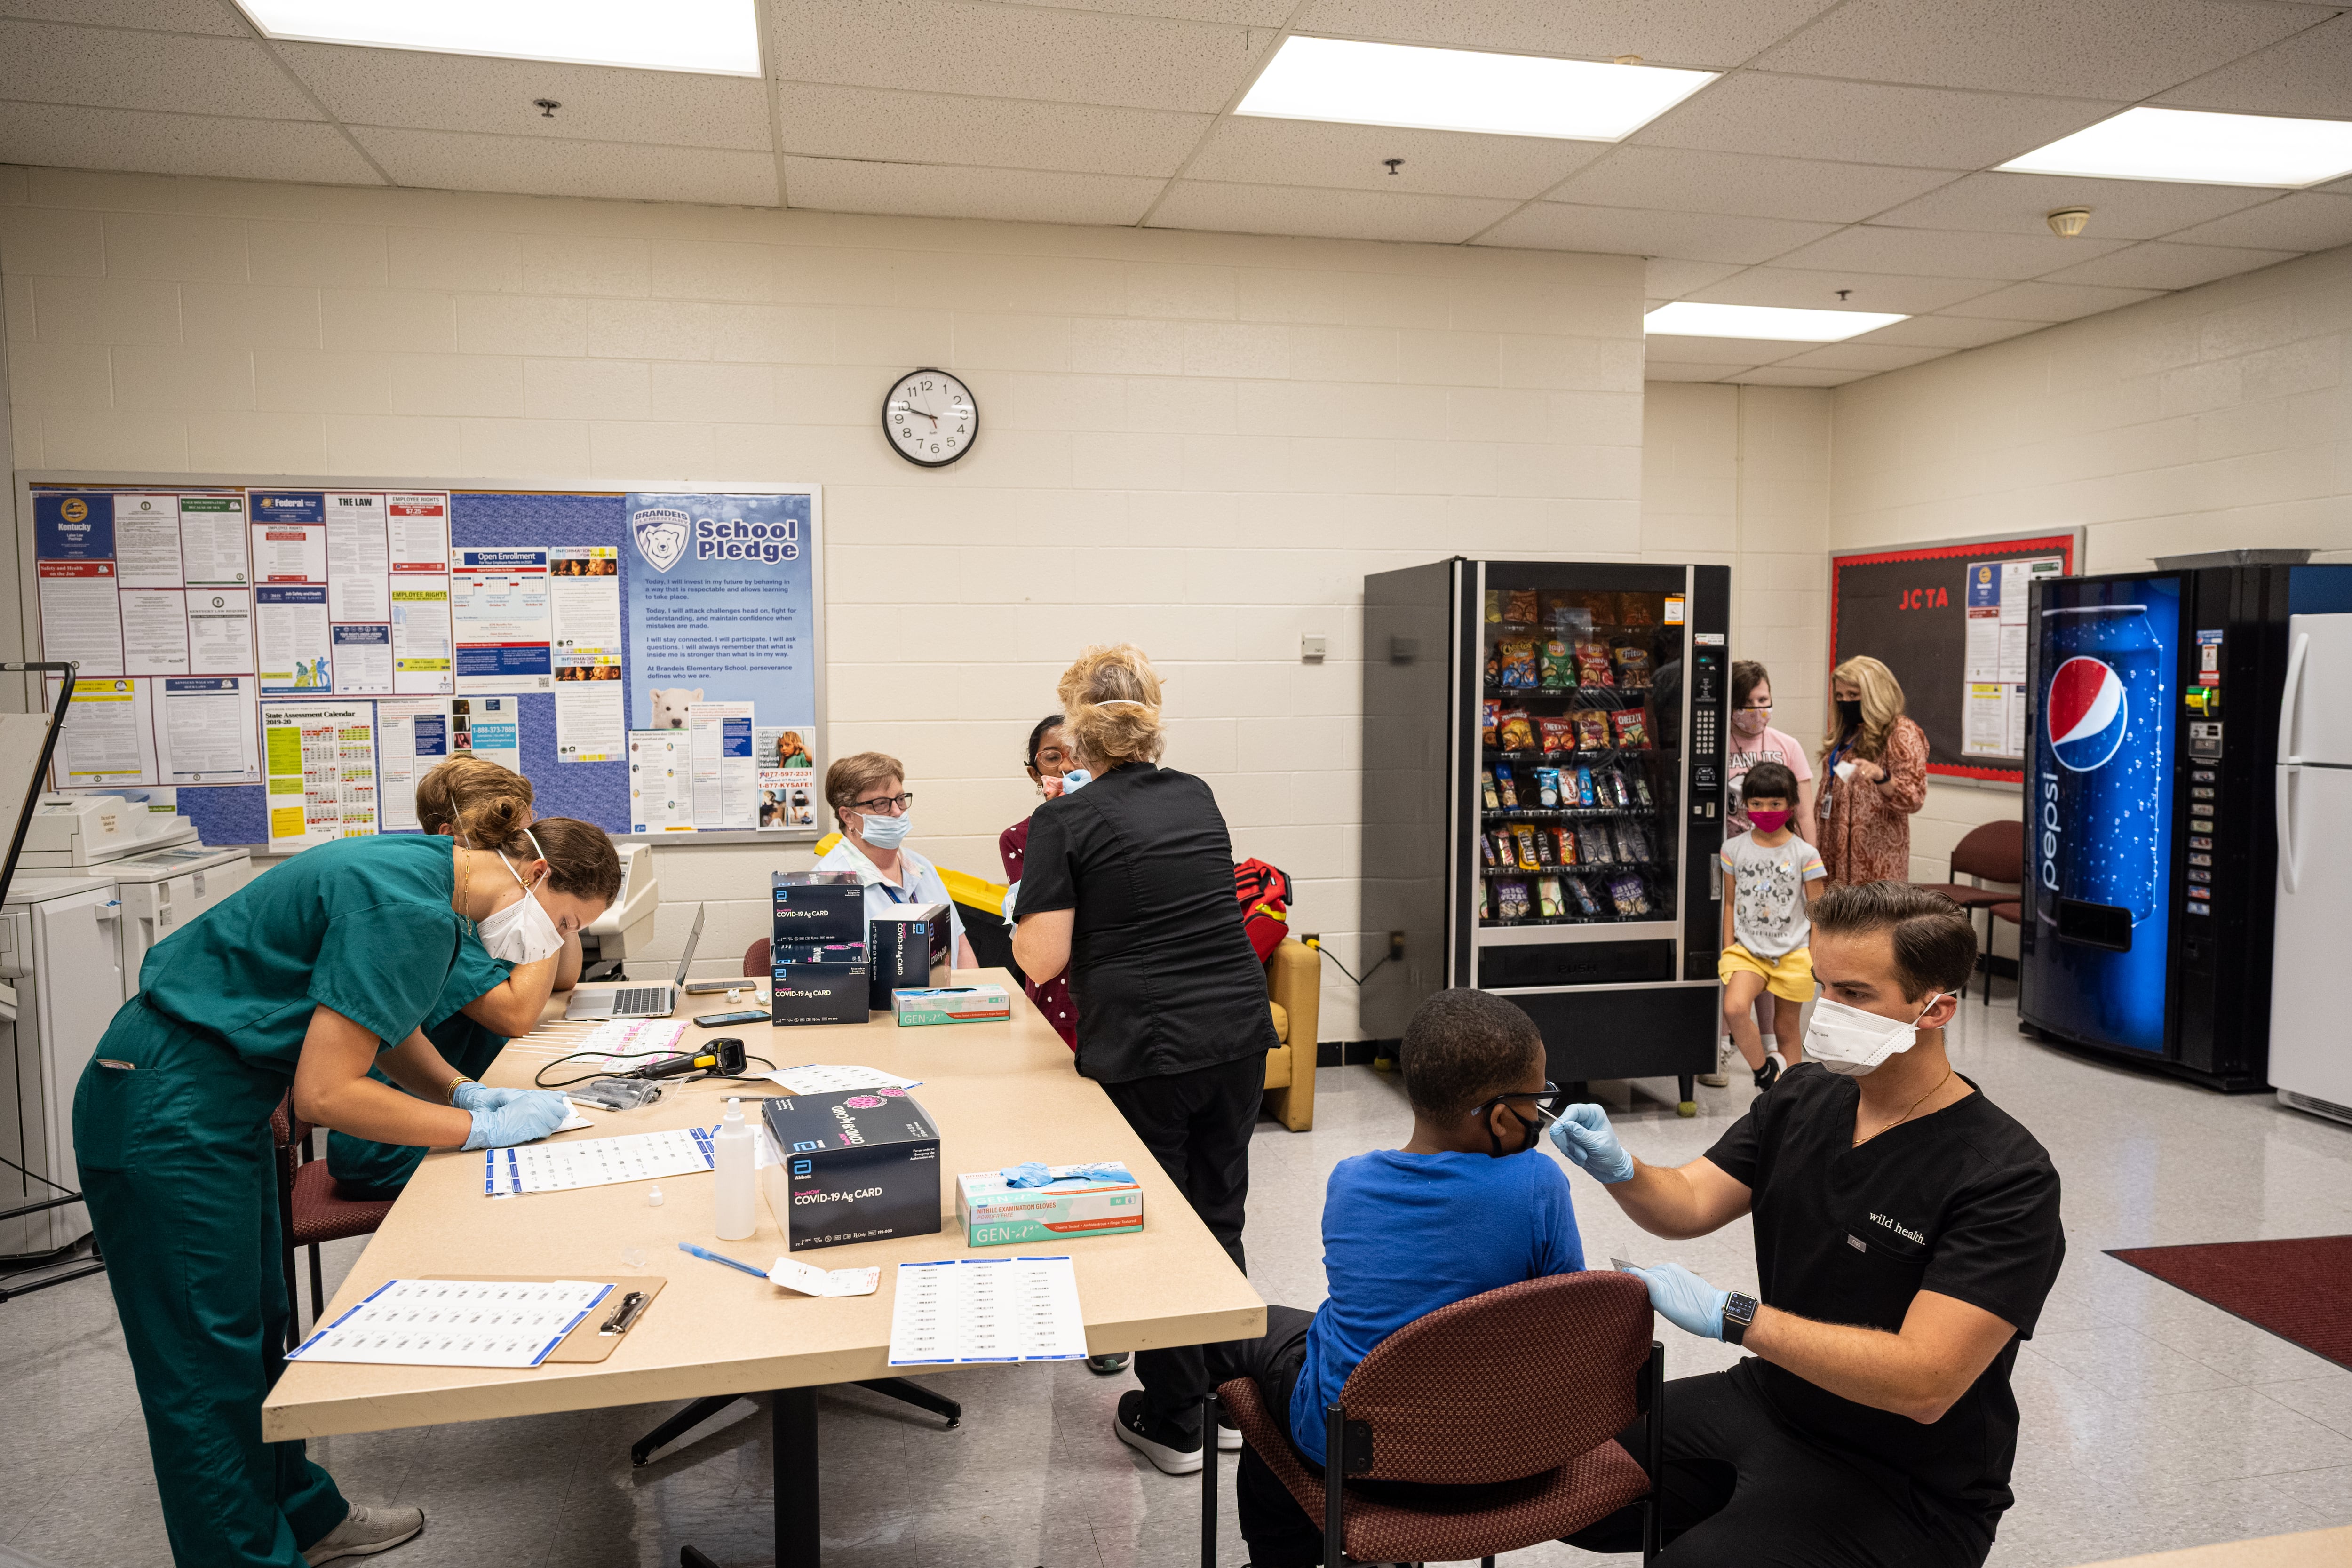 Medical professionals wearing face masks conduct COVID PCR testing in a room at a school.